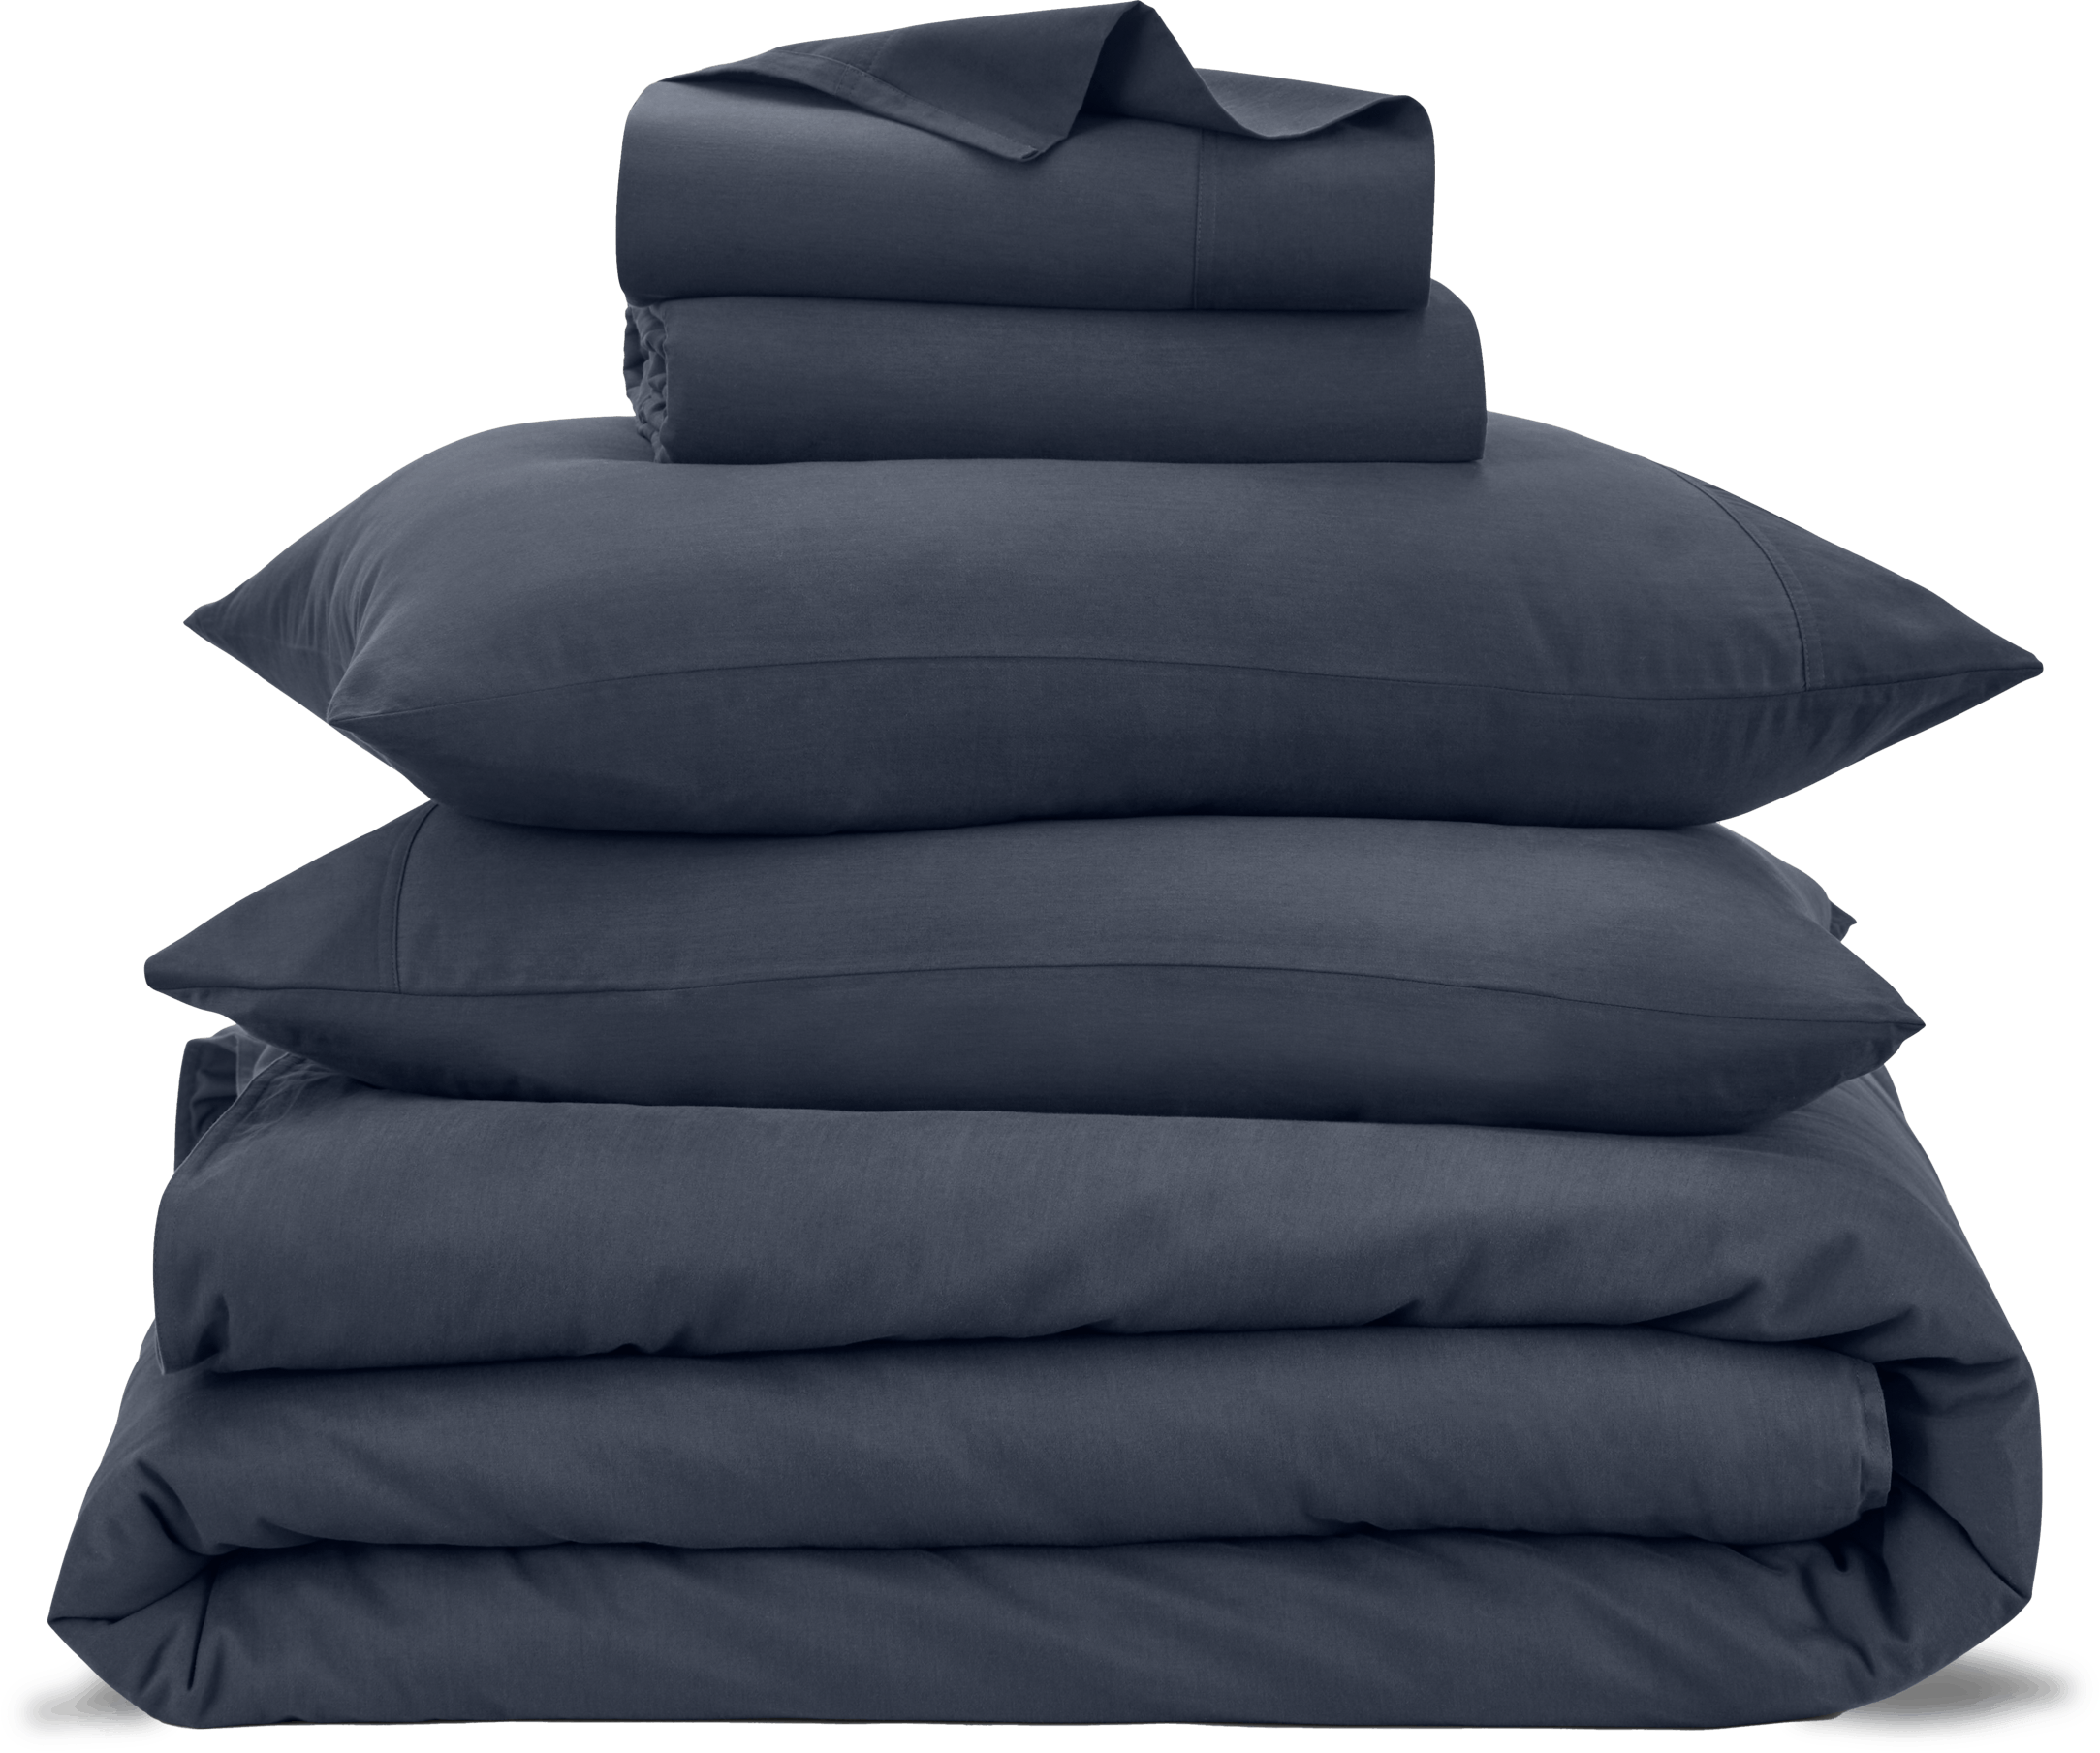 SuperSoft Collection Reviews